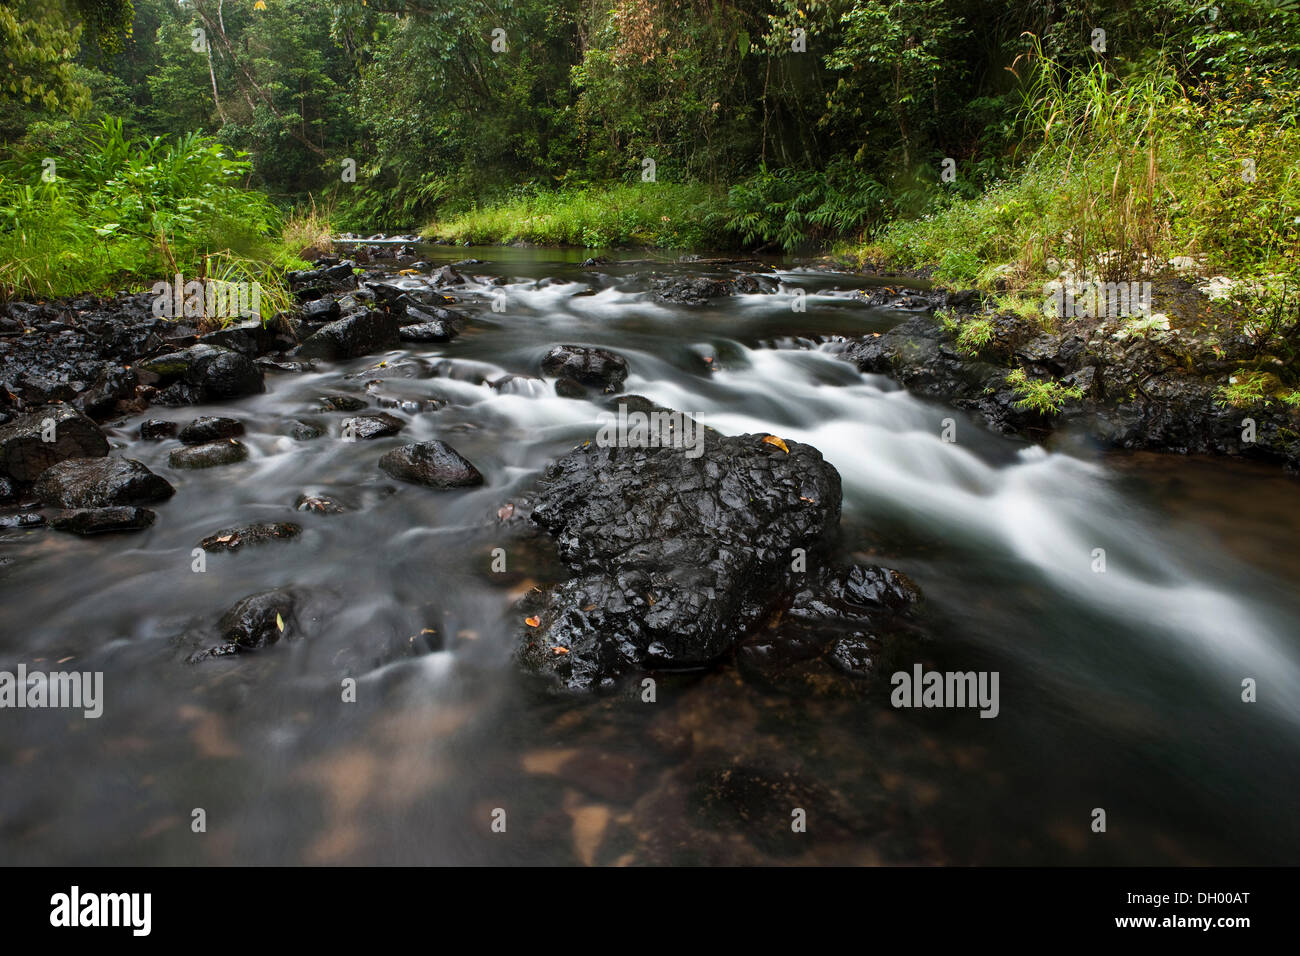 Stream in a rainforest in the Atherton Tablelands, Queensland, Australia Stock Photo